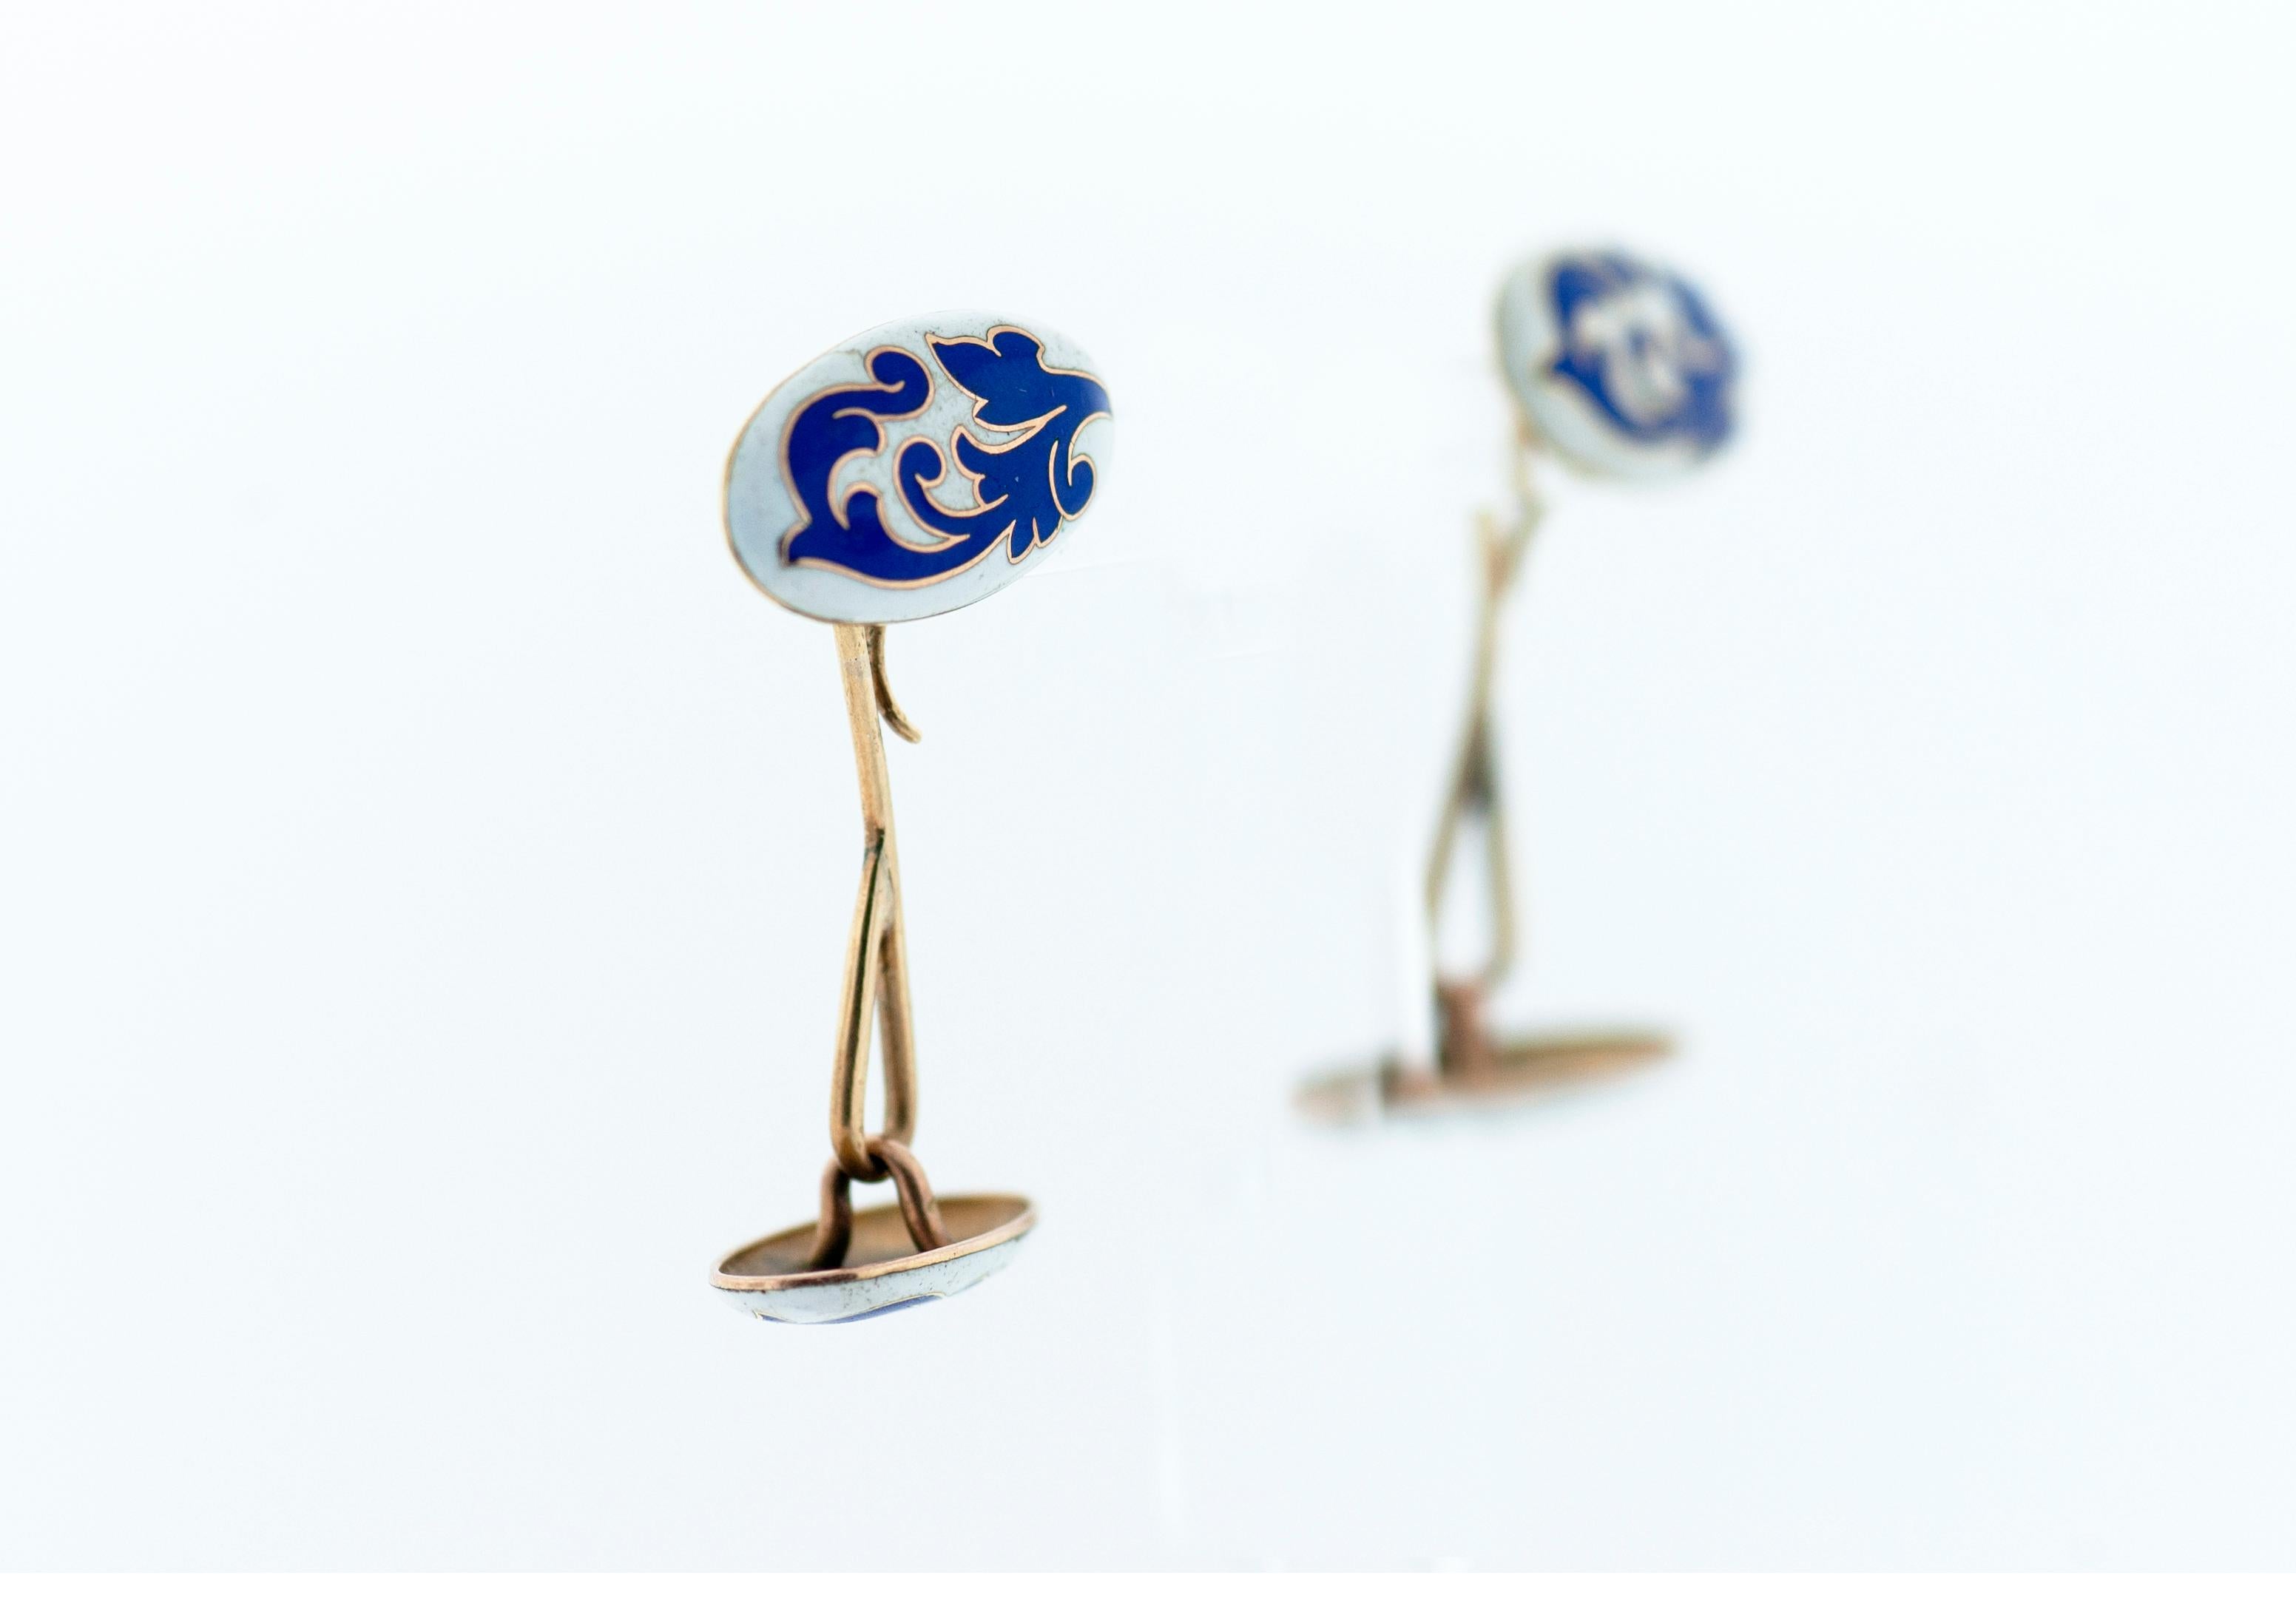 These classic cuff links are dated to the 1920's.  The cuff links are made from white and blue enamel with gold inlay.  The cuff links are linked together and soldered in a classic fashion.  The craftsmanship of the enamel is nothing short of